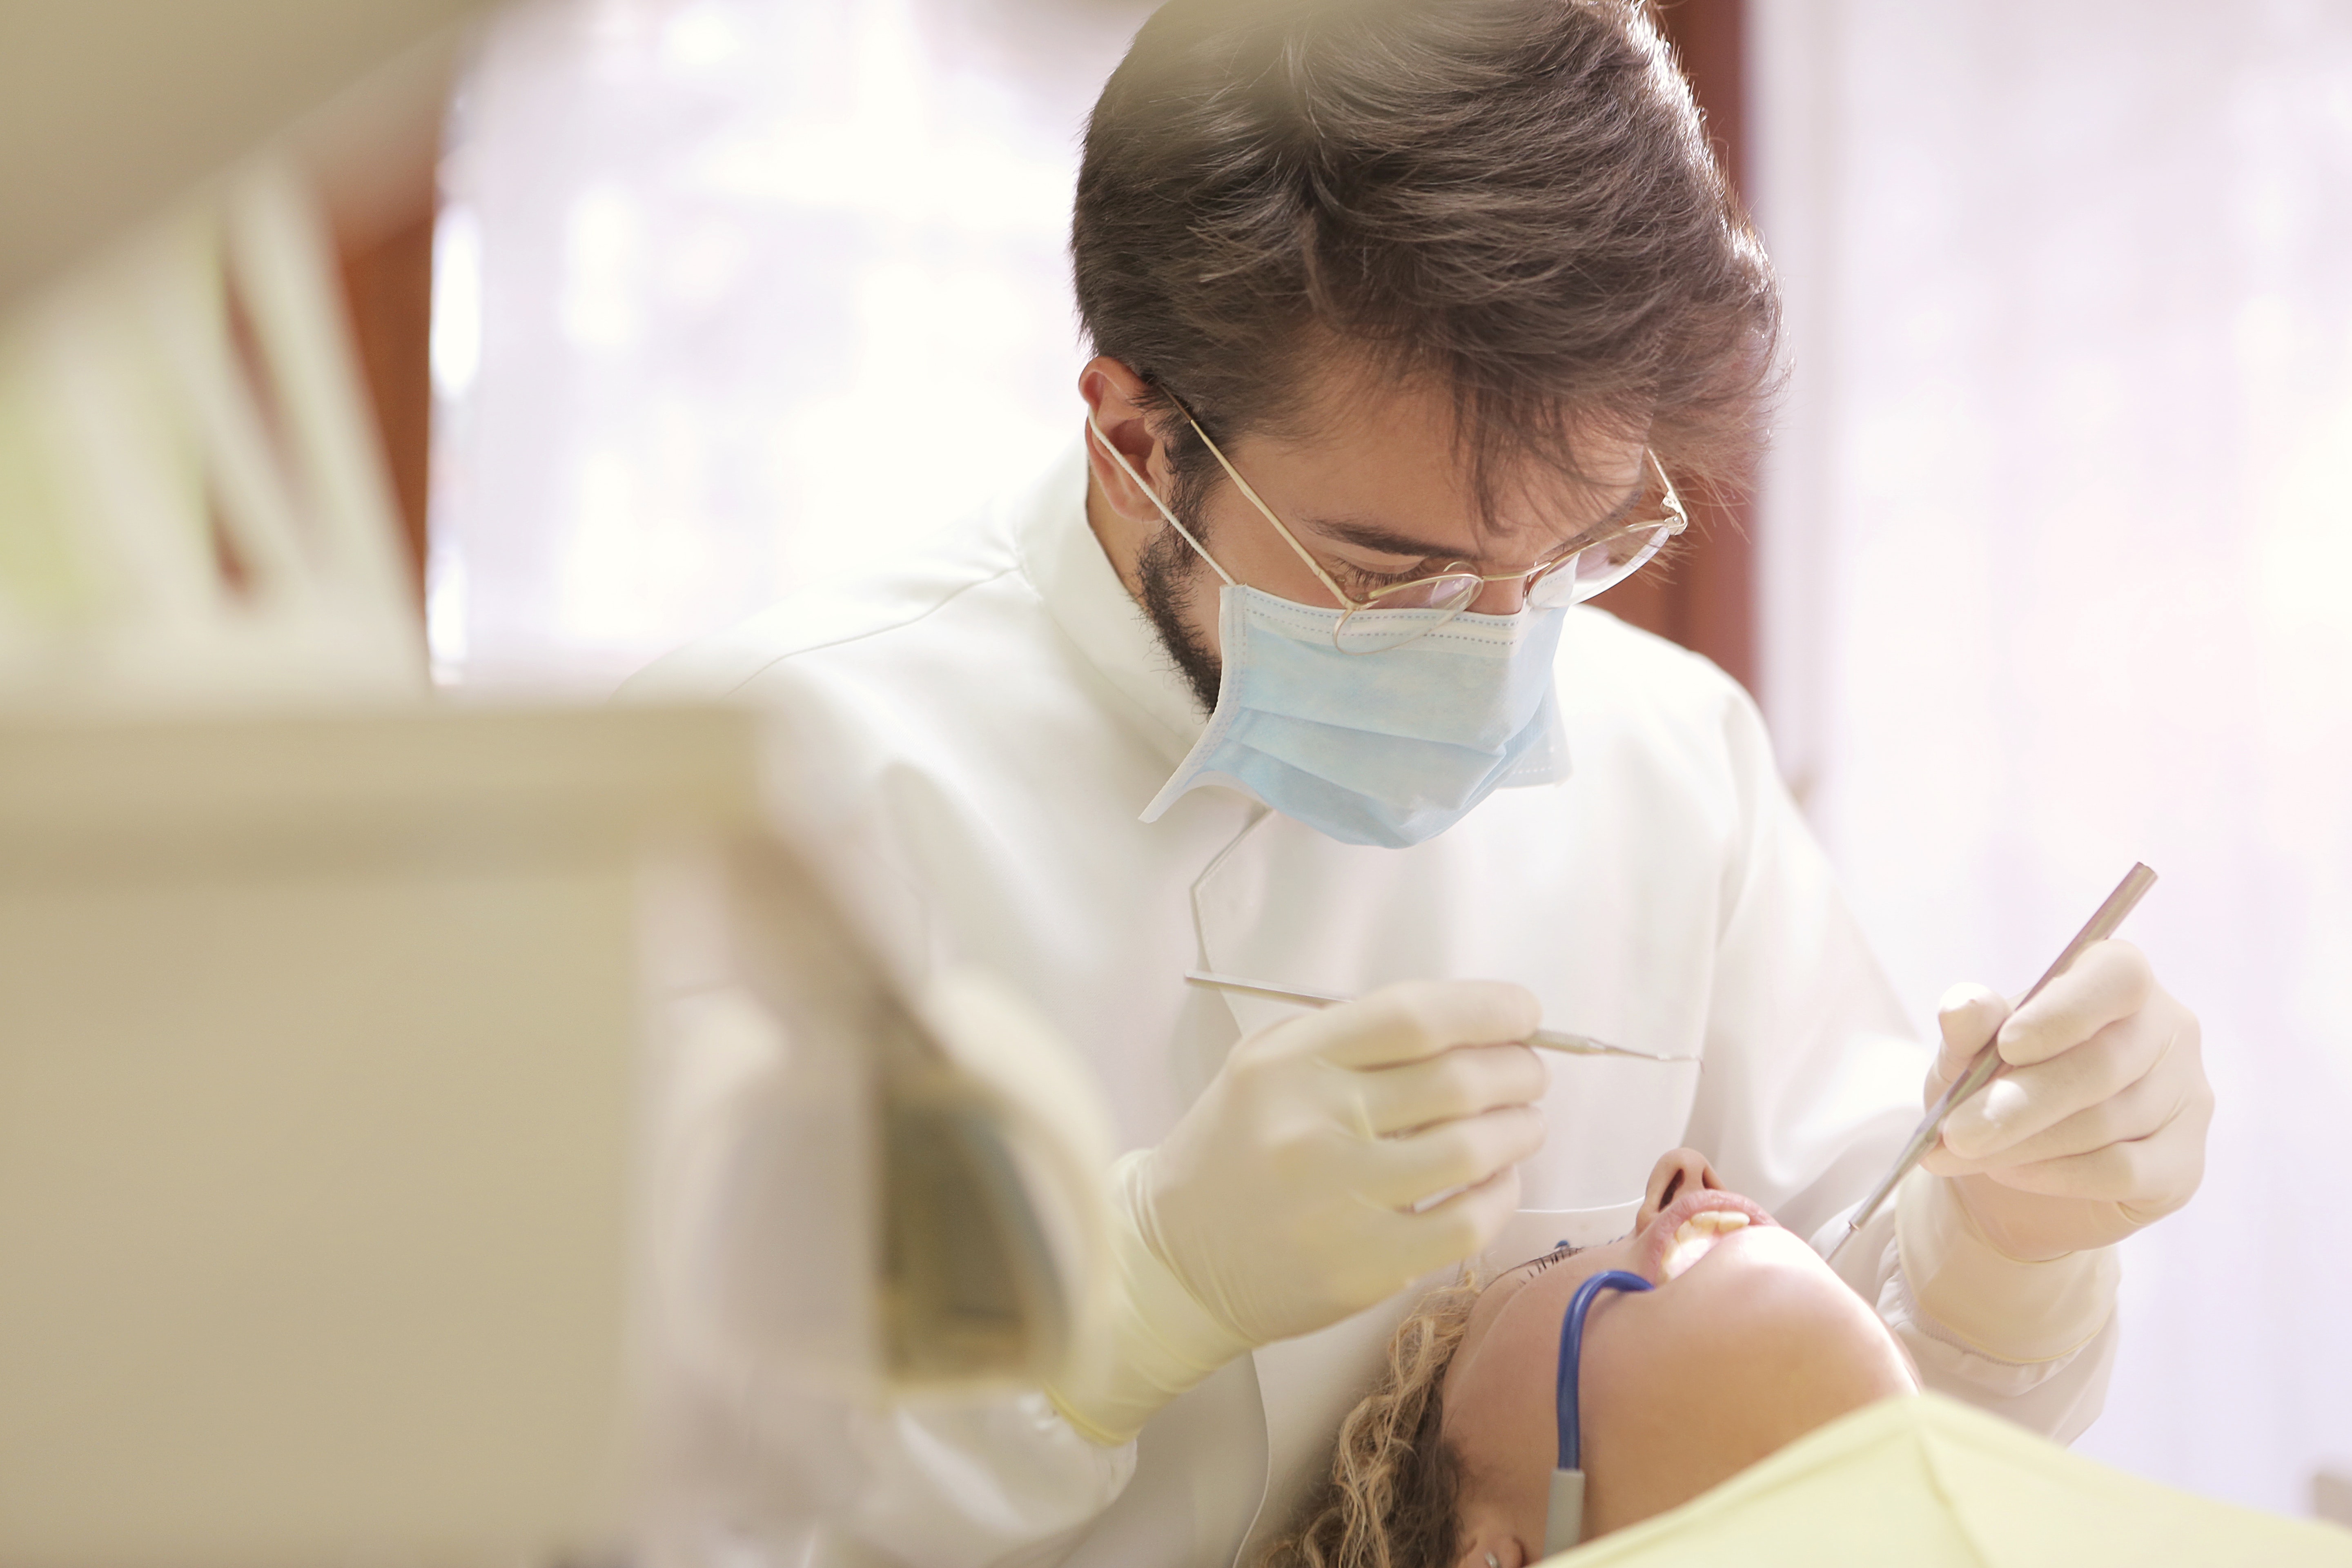 Dental Providers that accept Medicaid